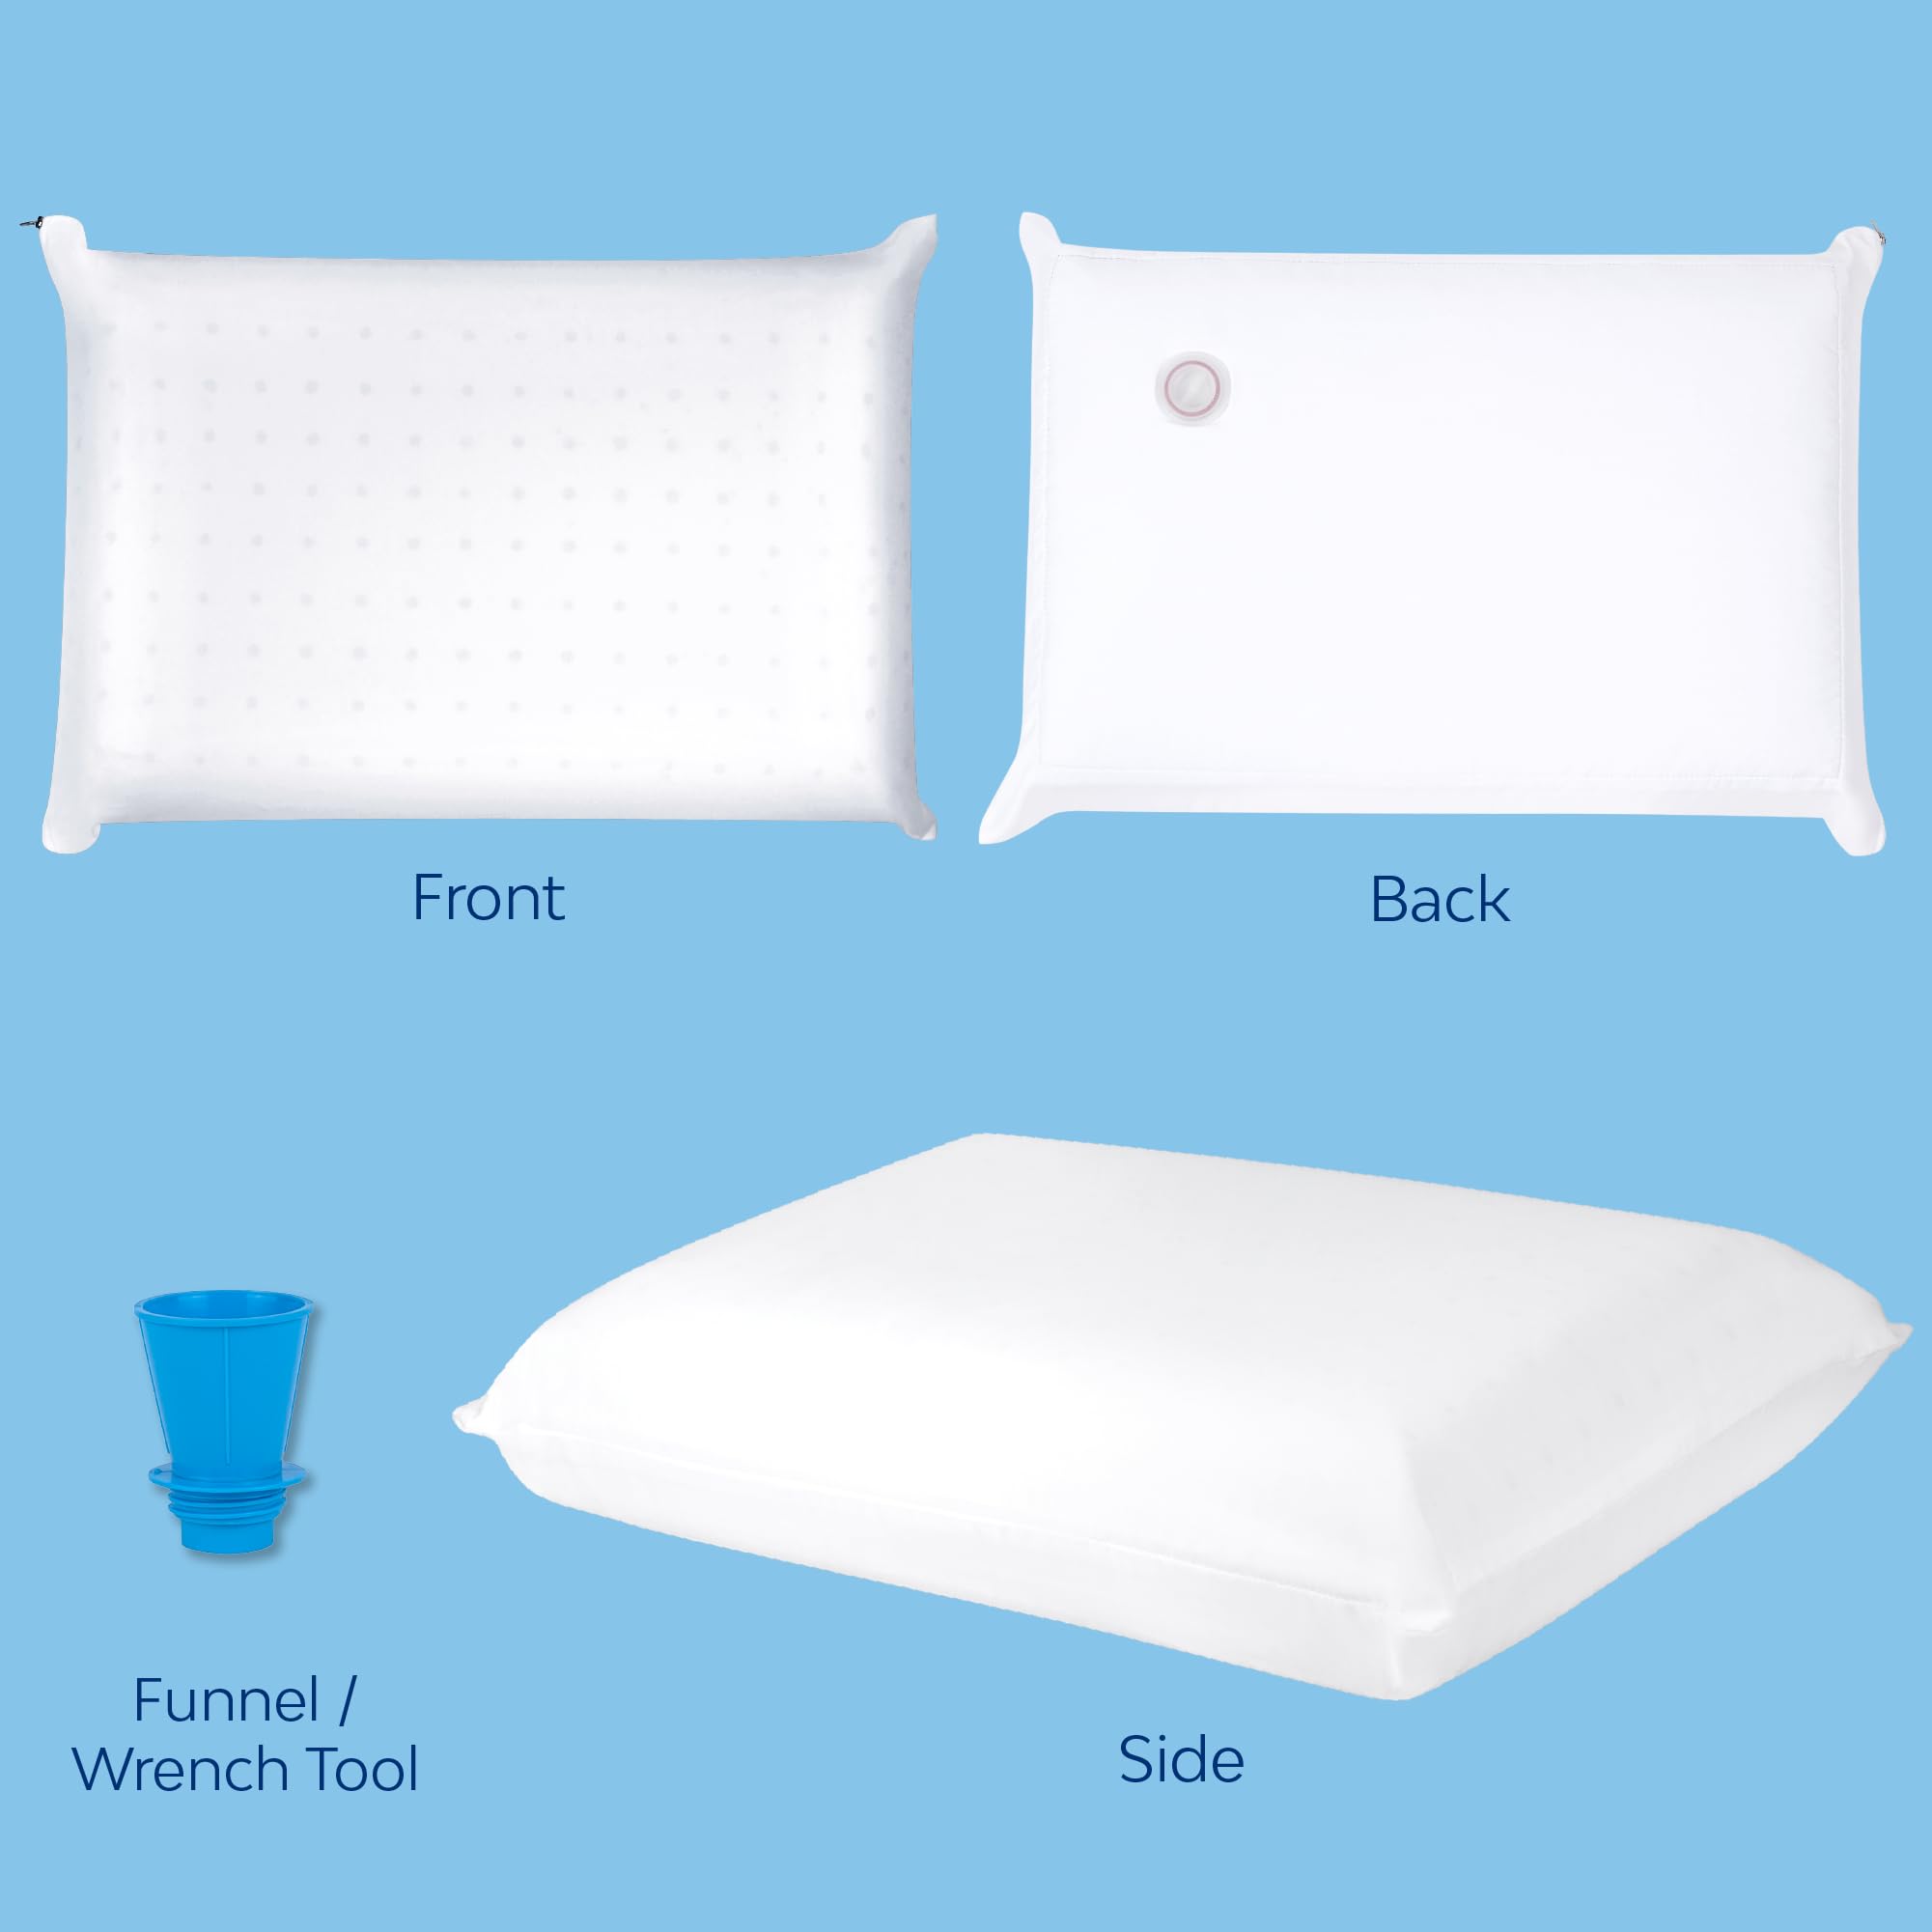 Mediflow Water Pillow Memory Foam re-Invented with Waterbase Technology - Clinically Proven to Reduce Neck Pain & Improve Sleep Quality. (Value Pack)